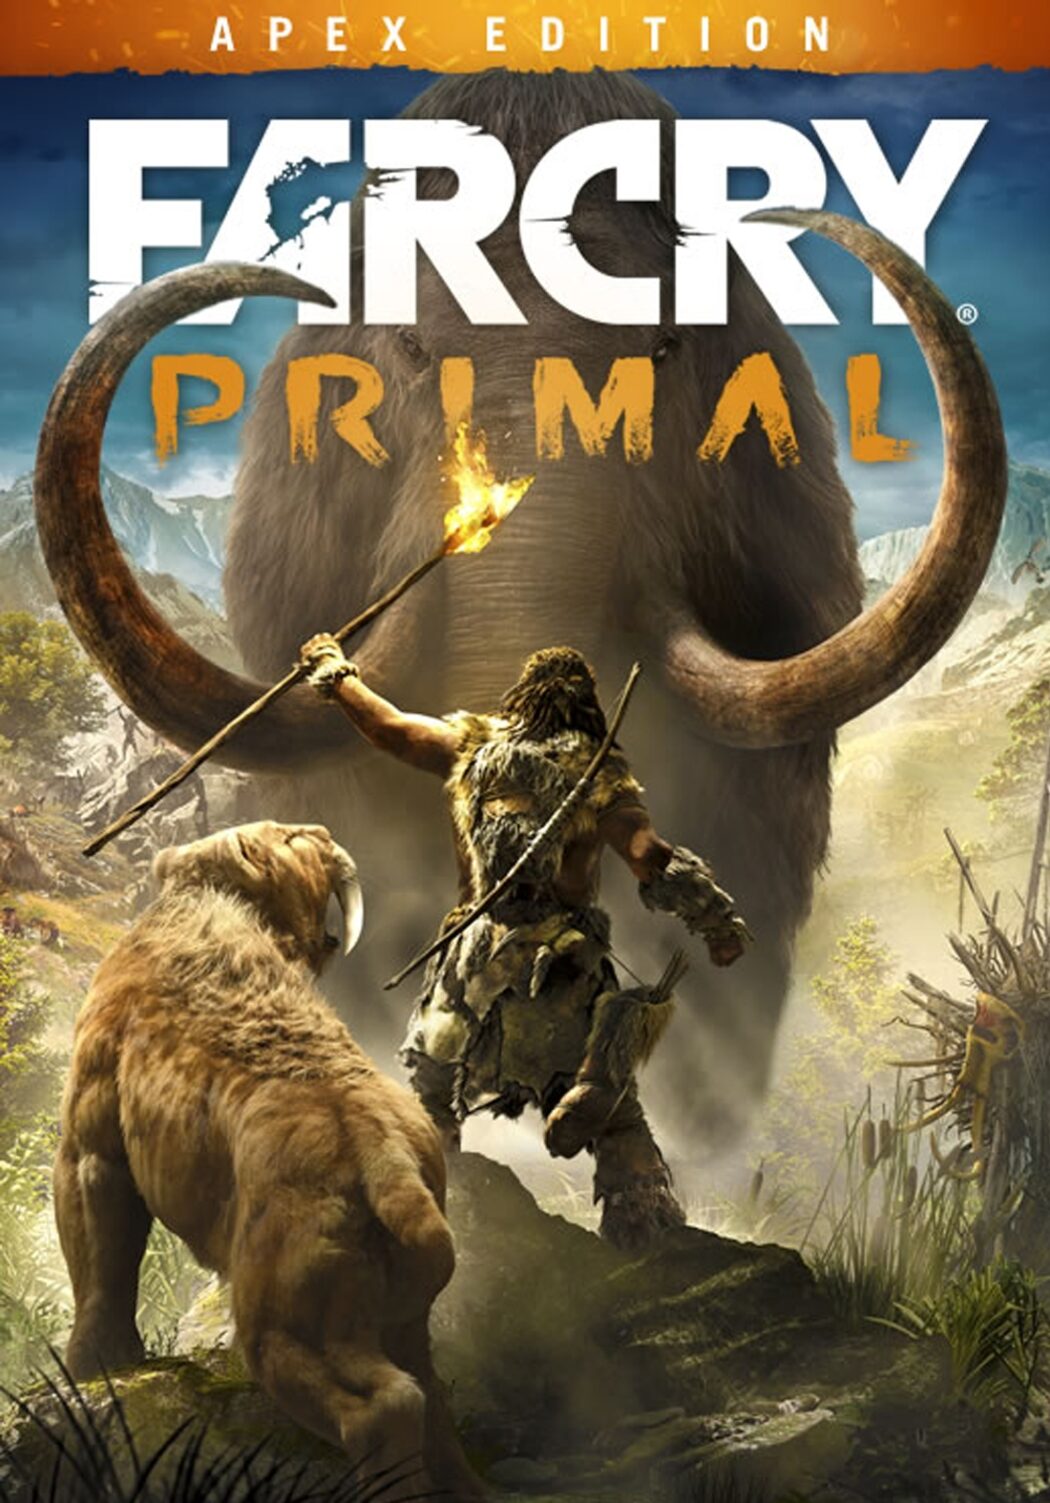 Far Cry Primal (for PC) Review